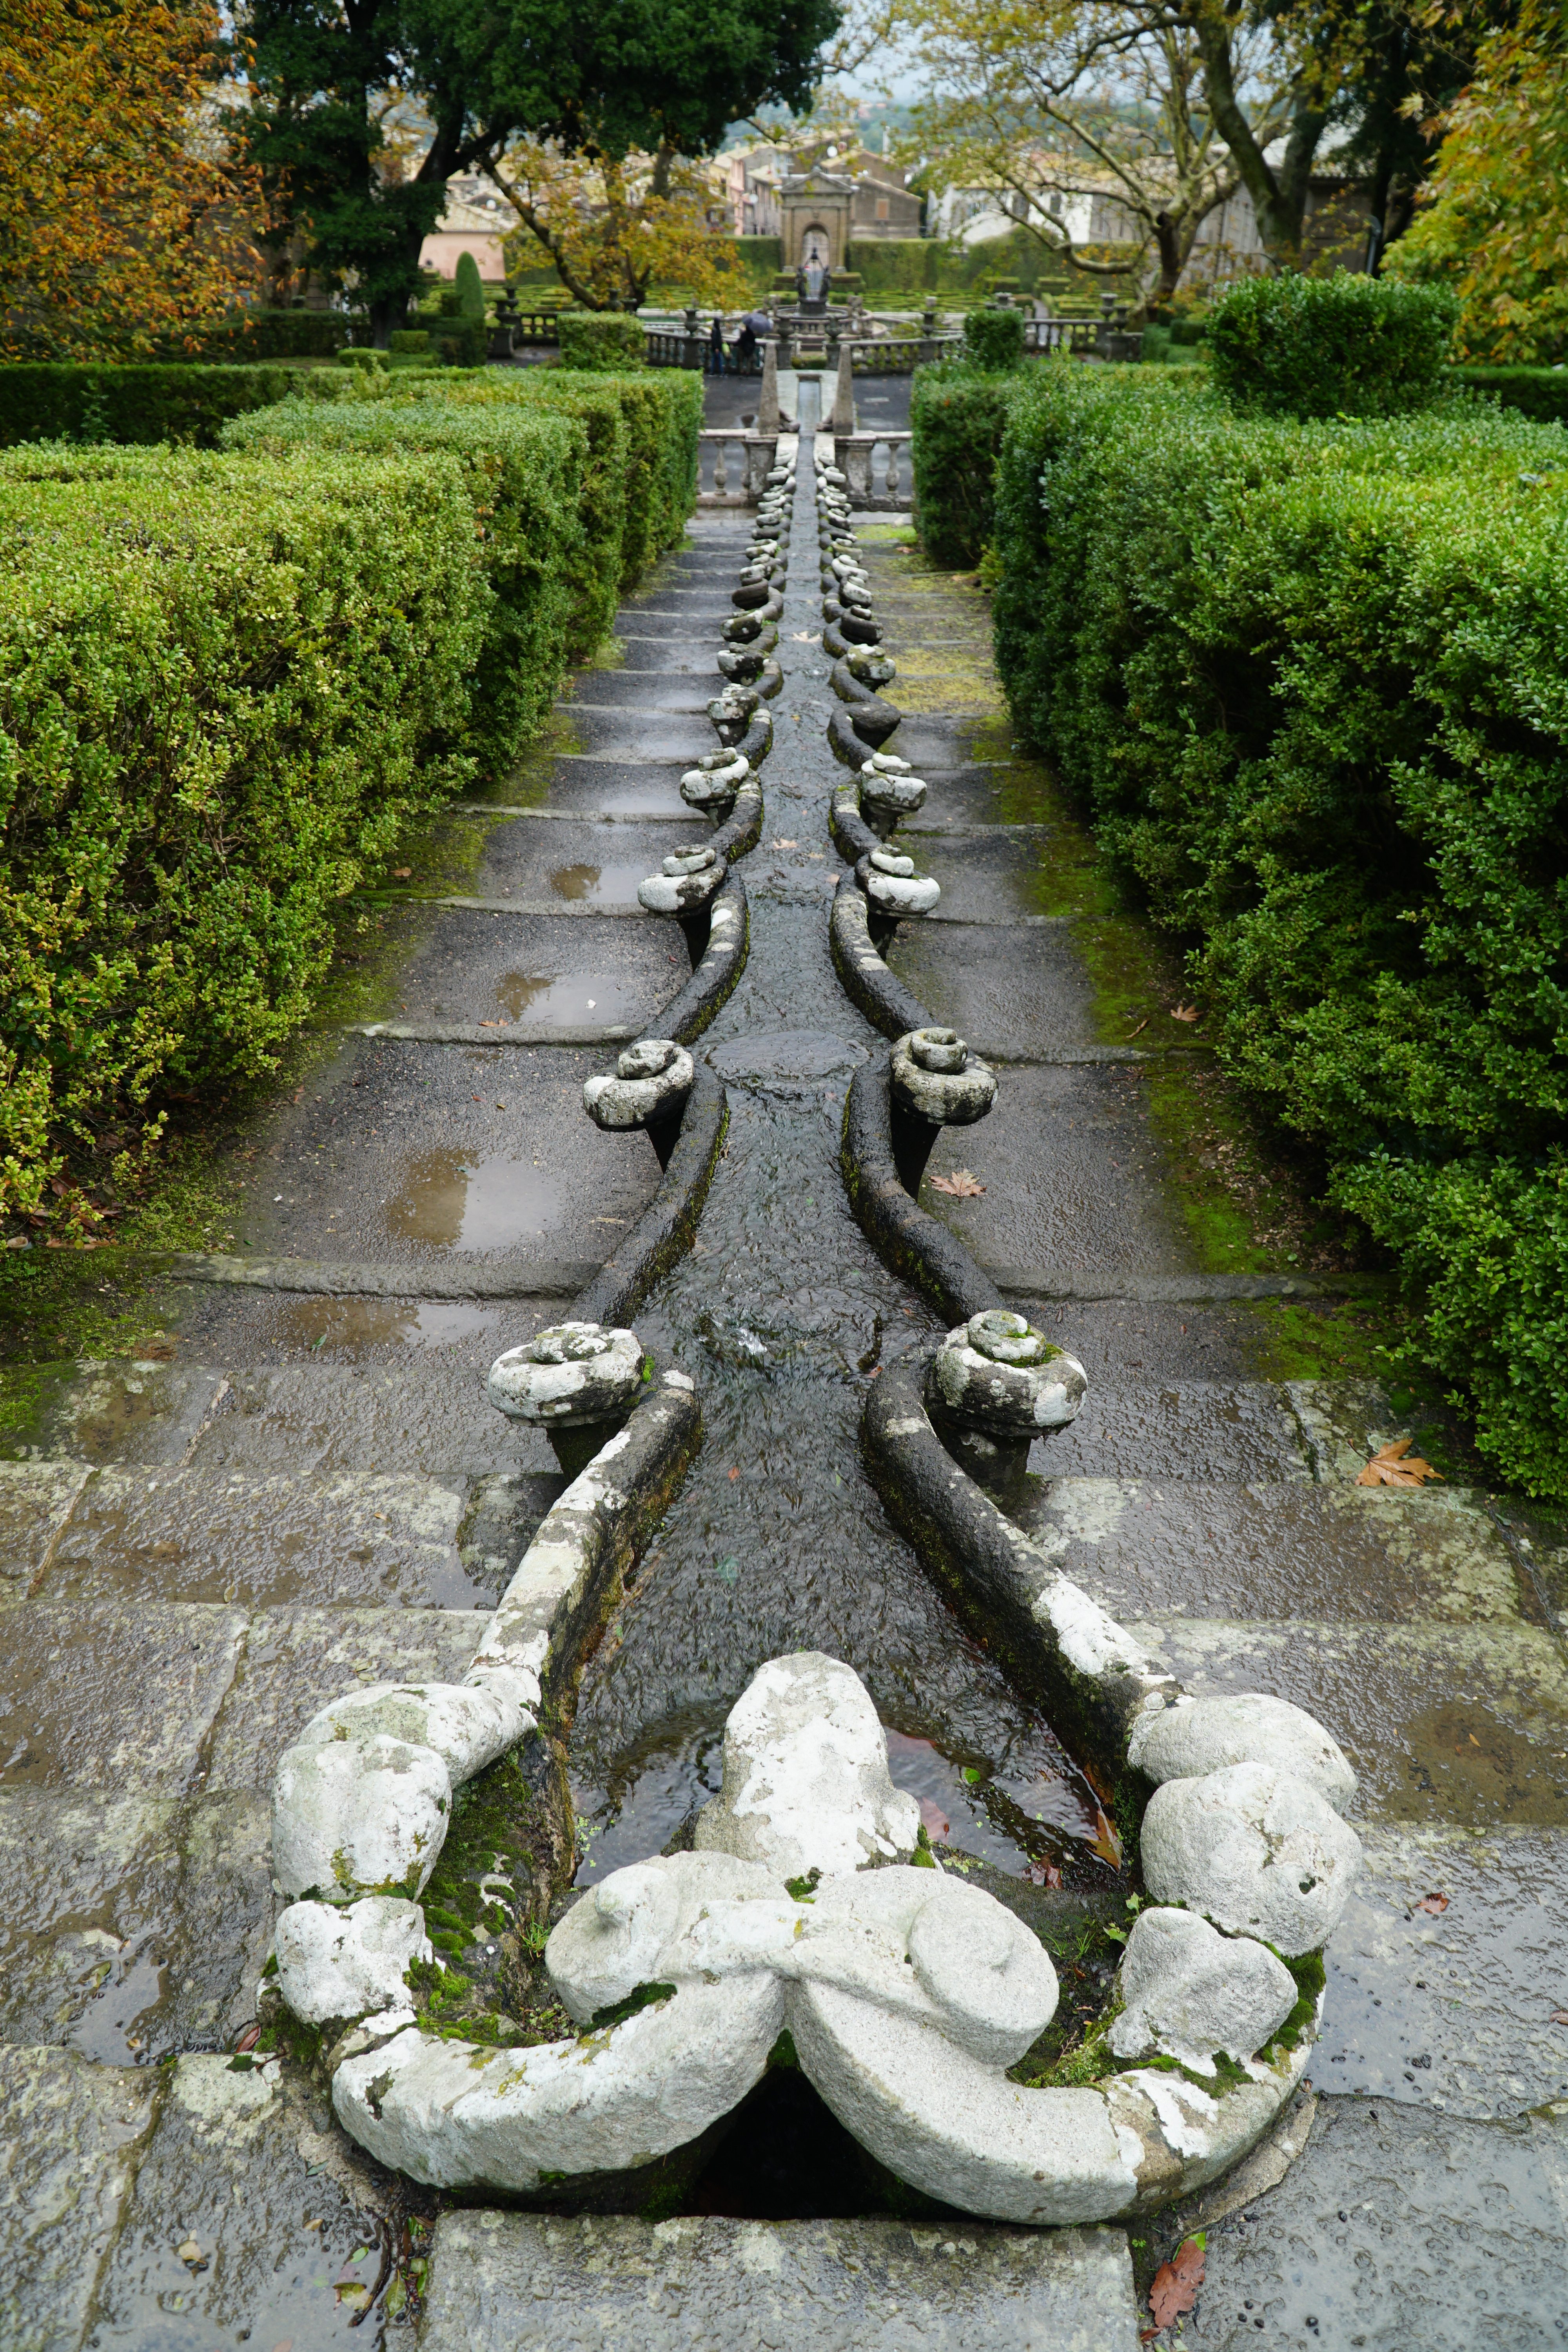 Image of central water feature at Villa Lante.